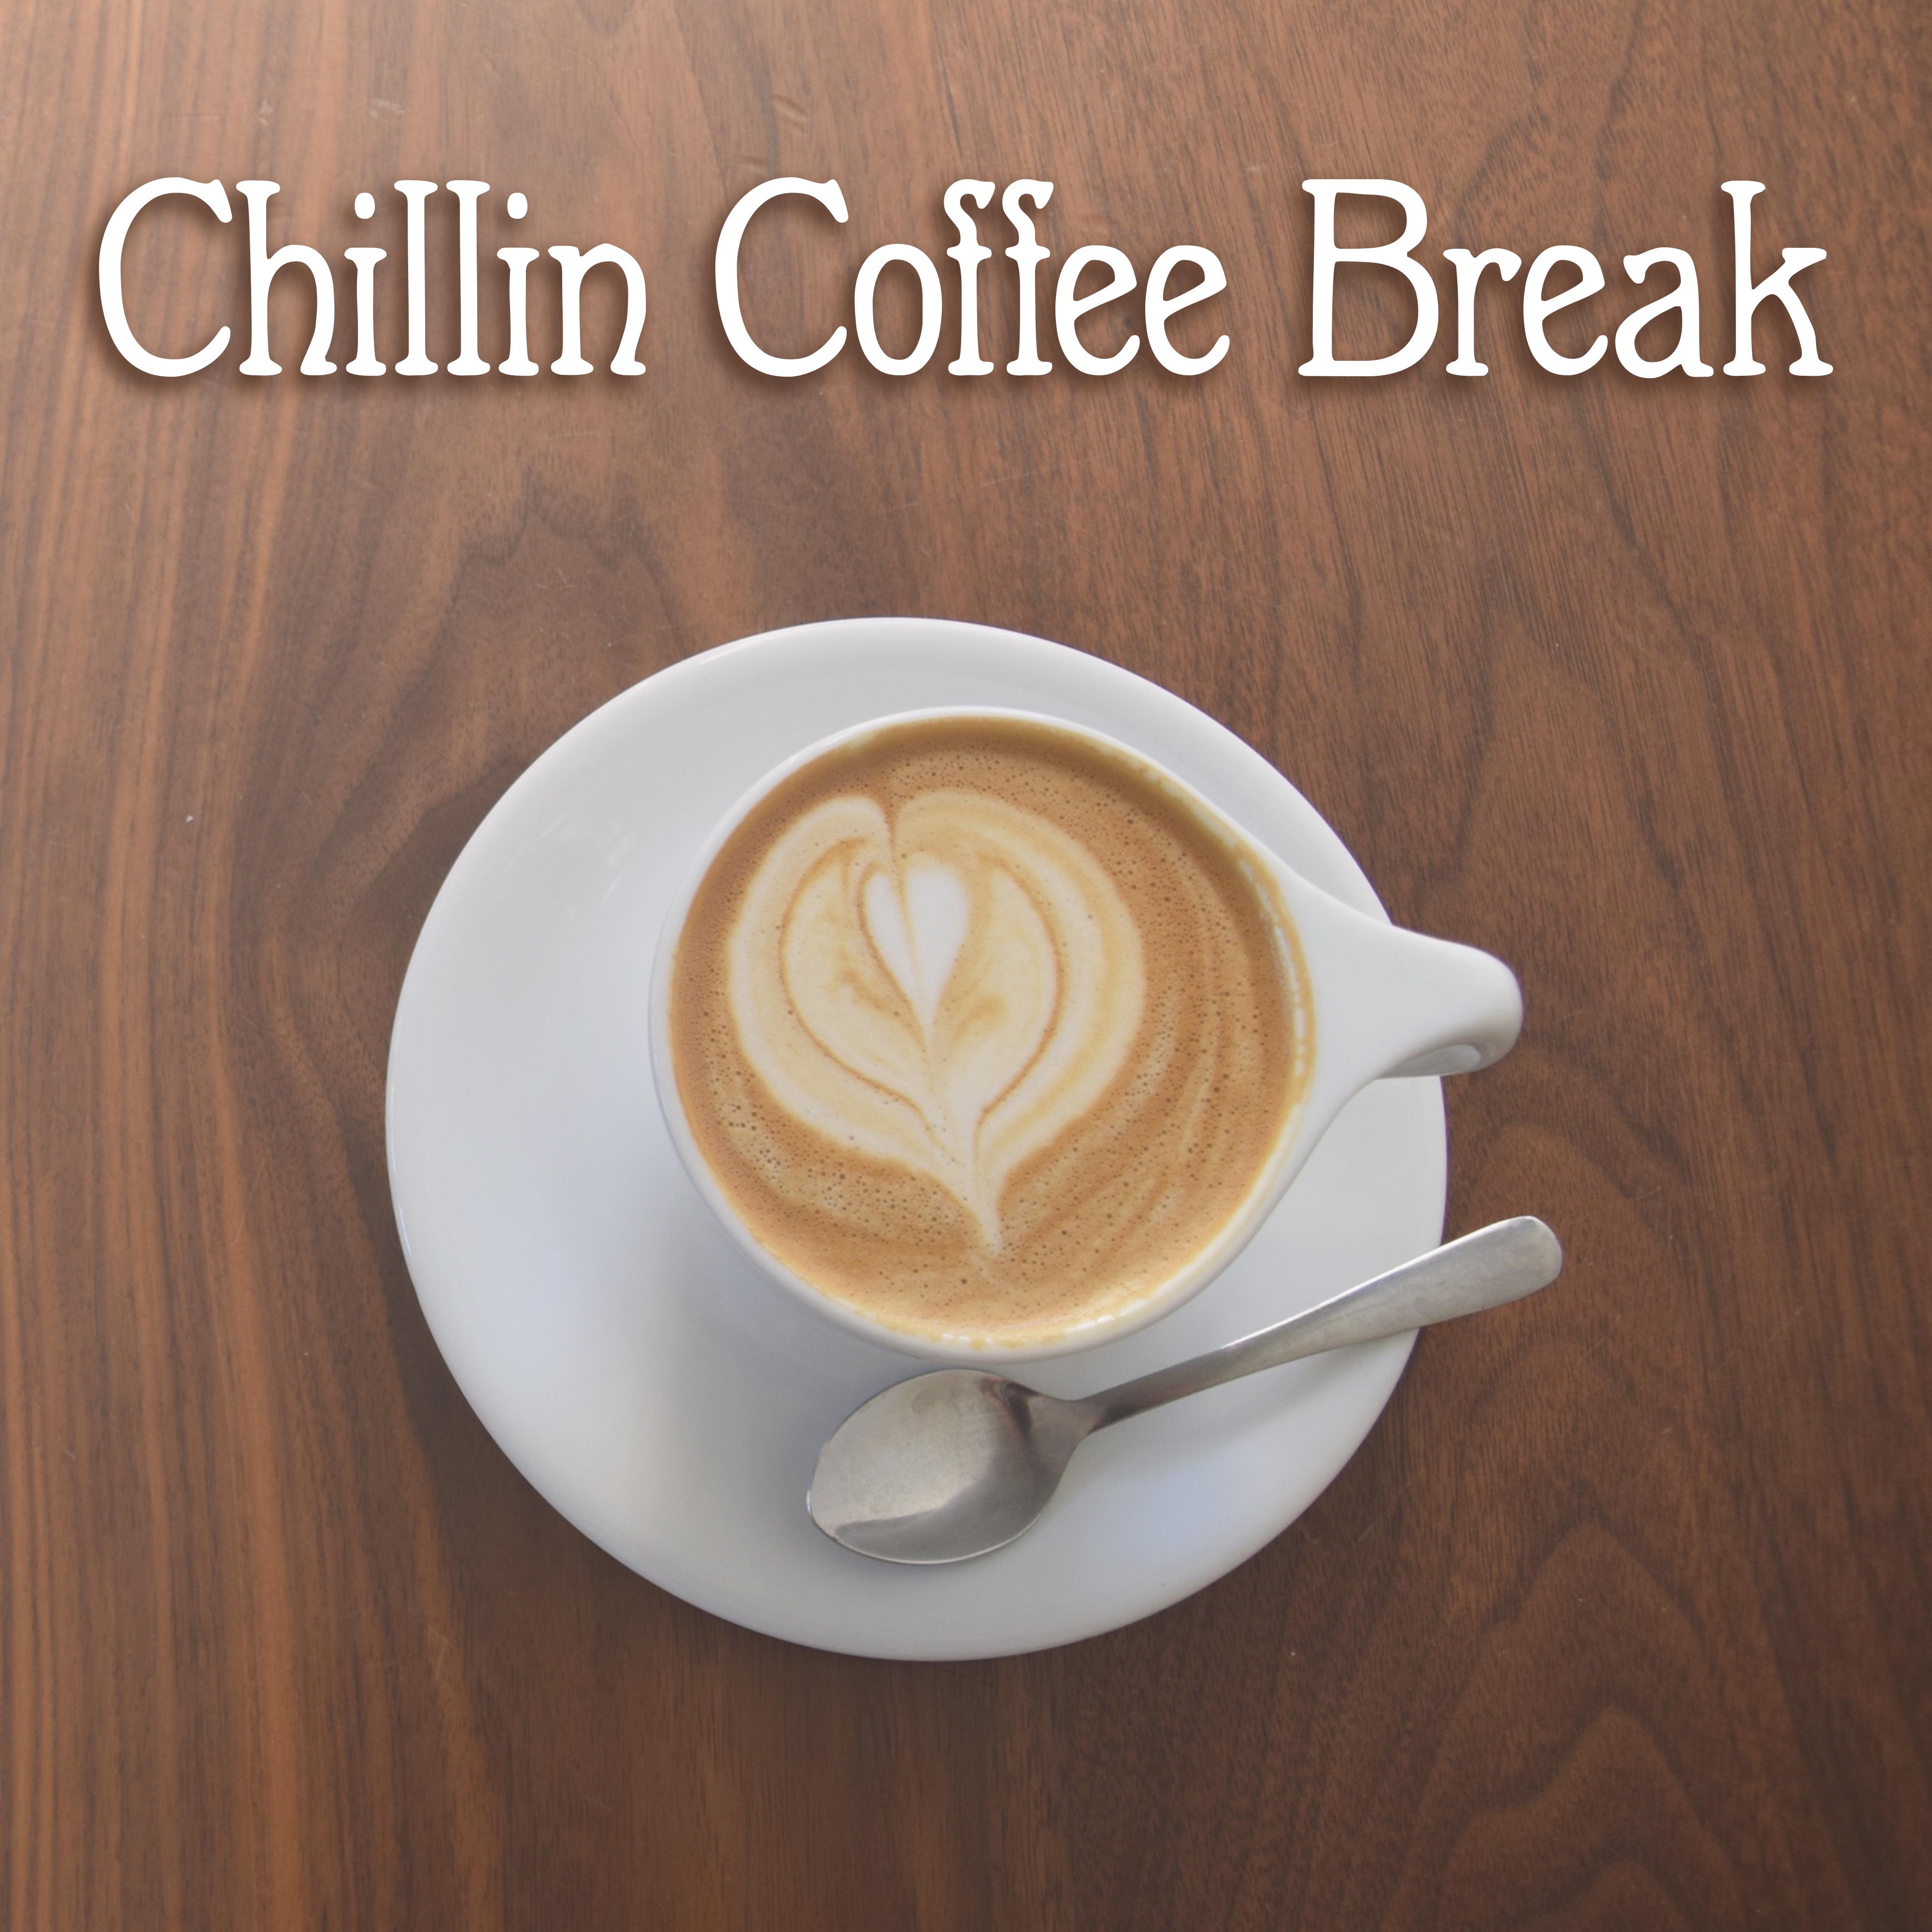 Chillin Coffee Break – Relaxing Chill Out Music, Deep Chillout, Music for Cafe, Hotel Lounge